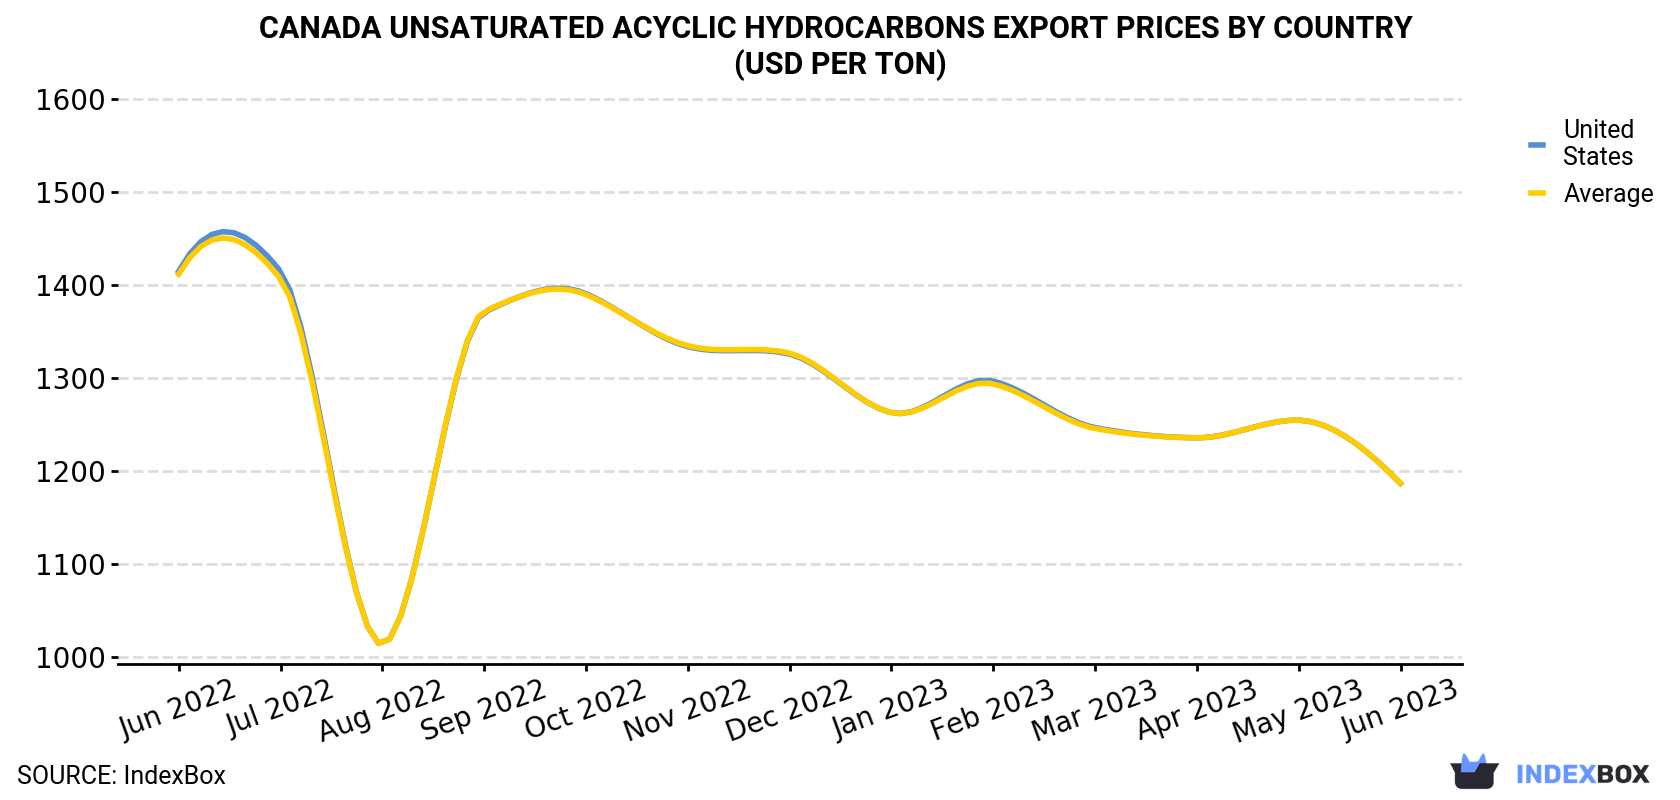 Canada Unsaturated Acyclic Hydrocarbons Export Prices By Country (USD Per Ton)